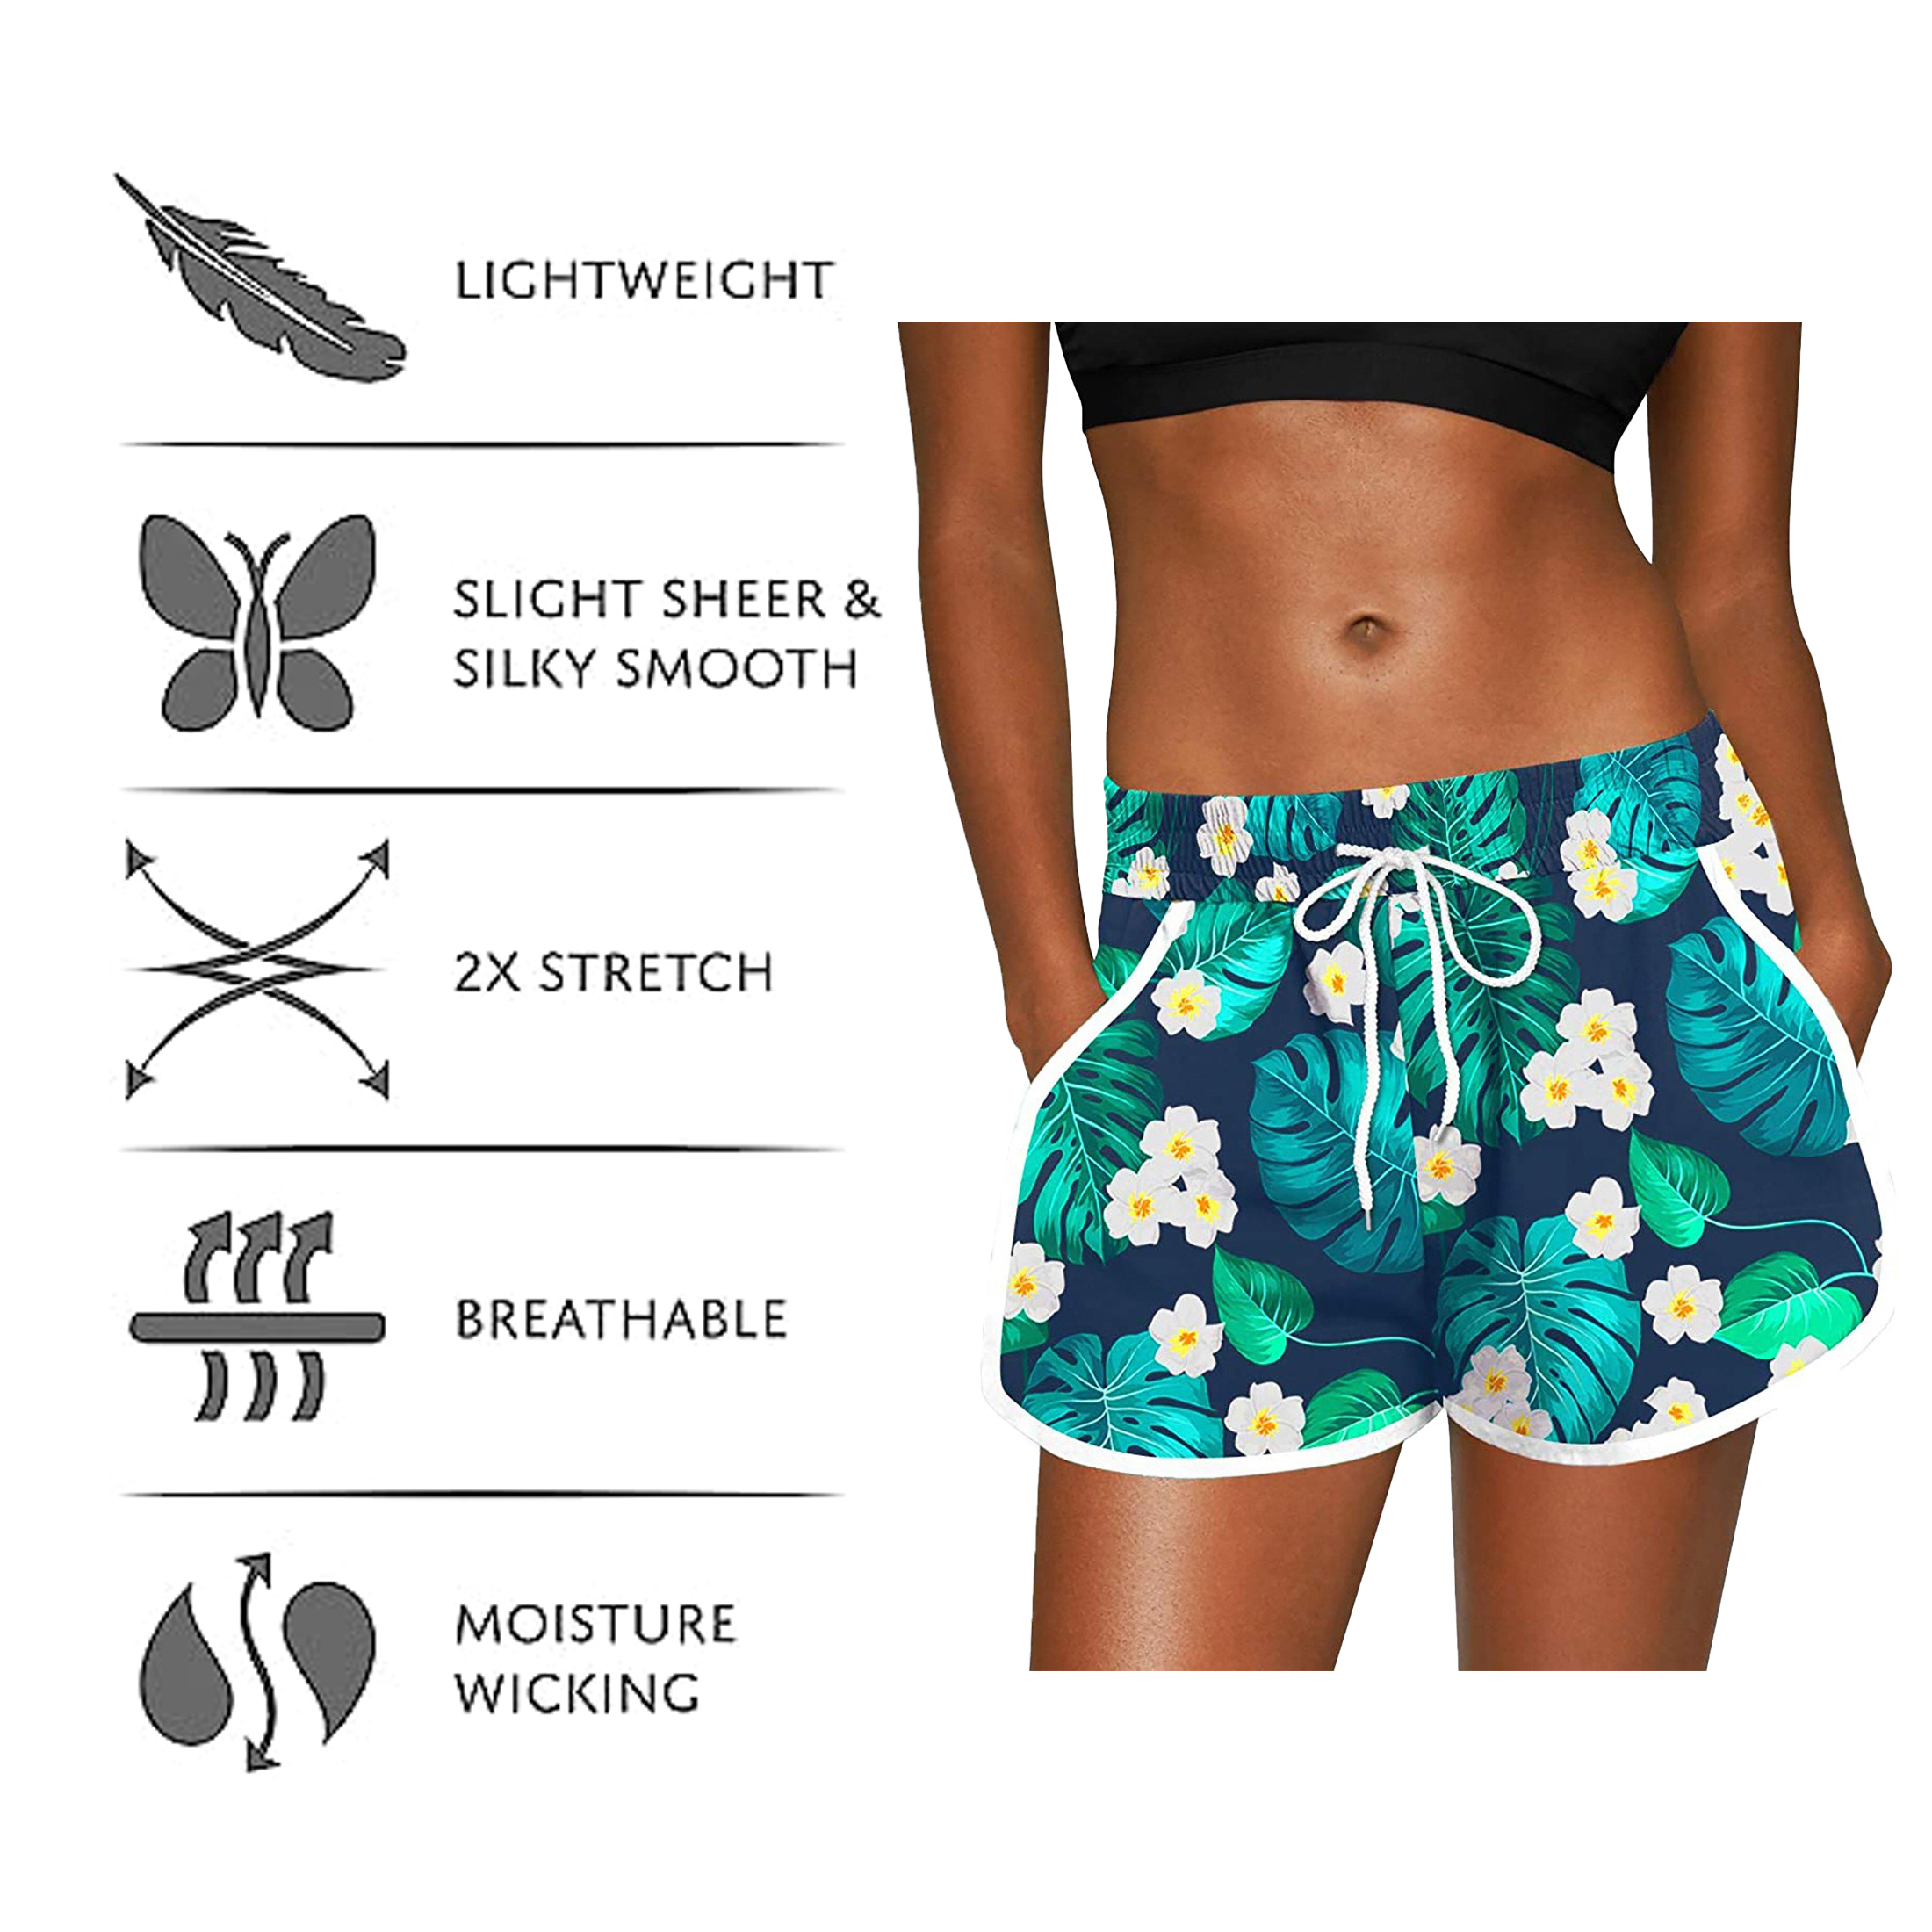 2-Pack Women's Floral Printed Shorts Elastic Waist Drawstring Summer Lounge Wear Pants Casual Dolphin Shorts With Pockets Quick Dry - XL